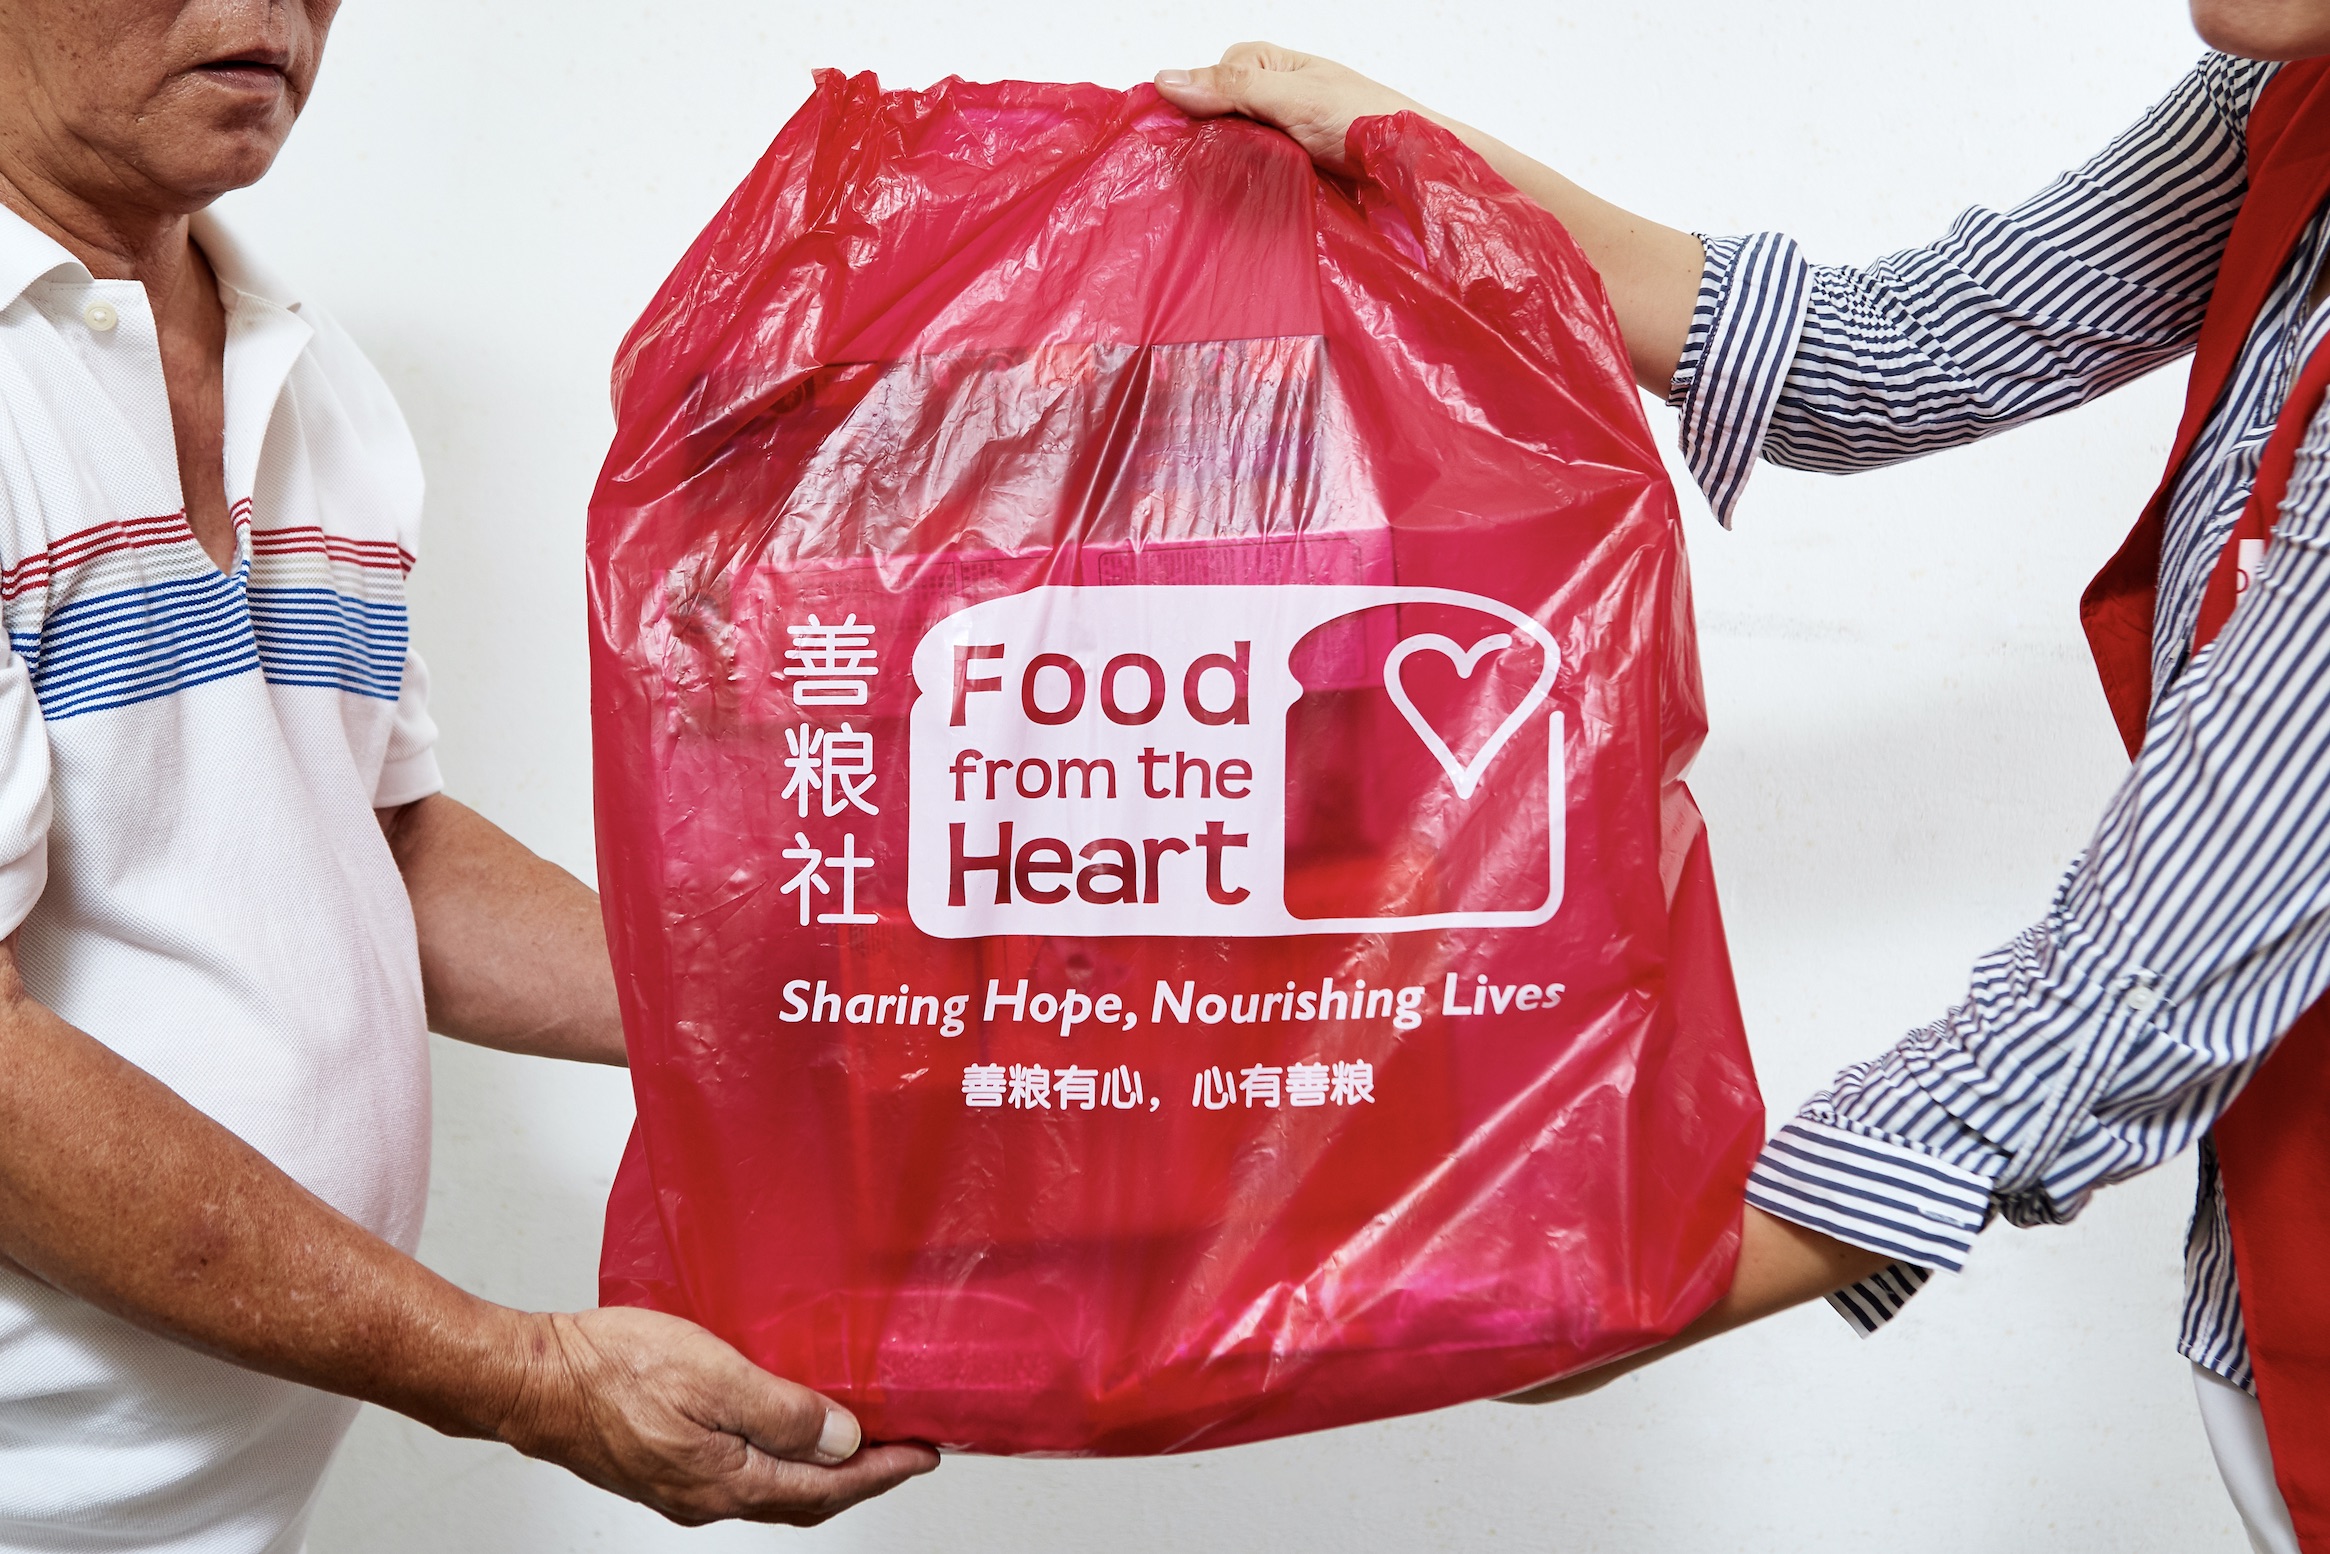 How Food from the Heart Feeds the Needy in Singapore